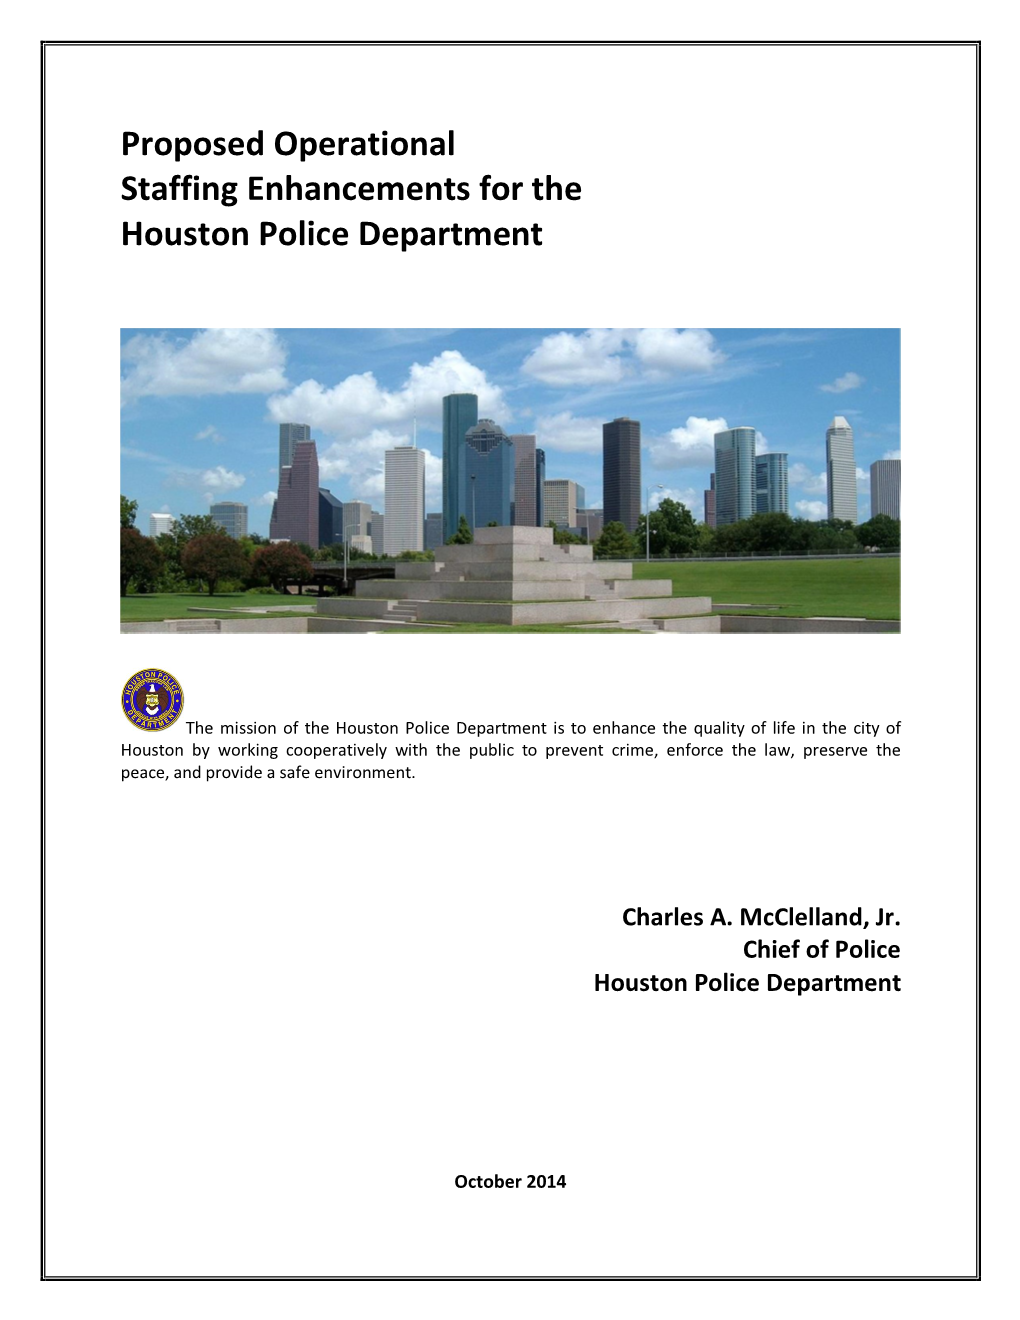 Proposed Operational Staffing Enhancements for the Houston Police Department